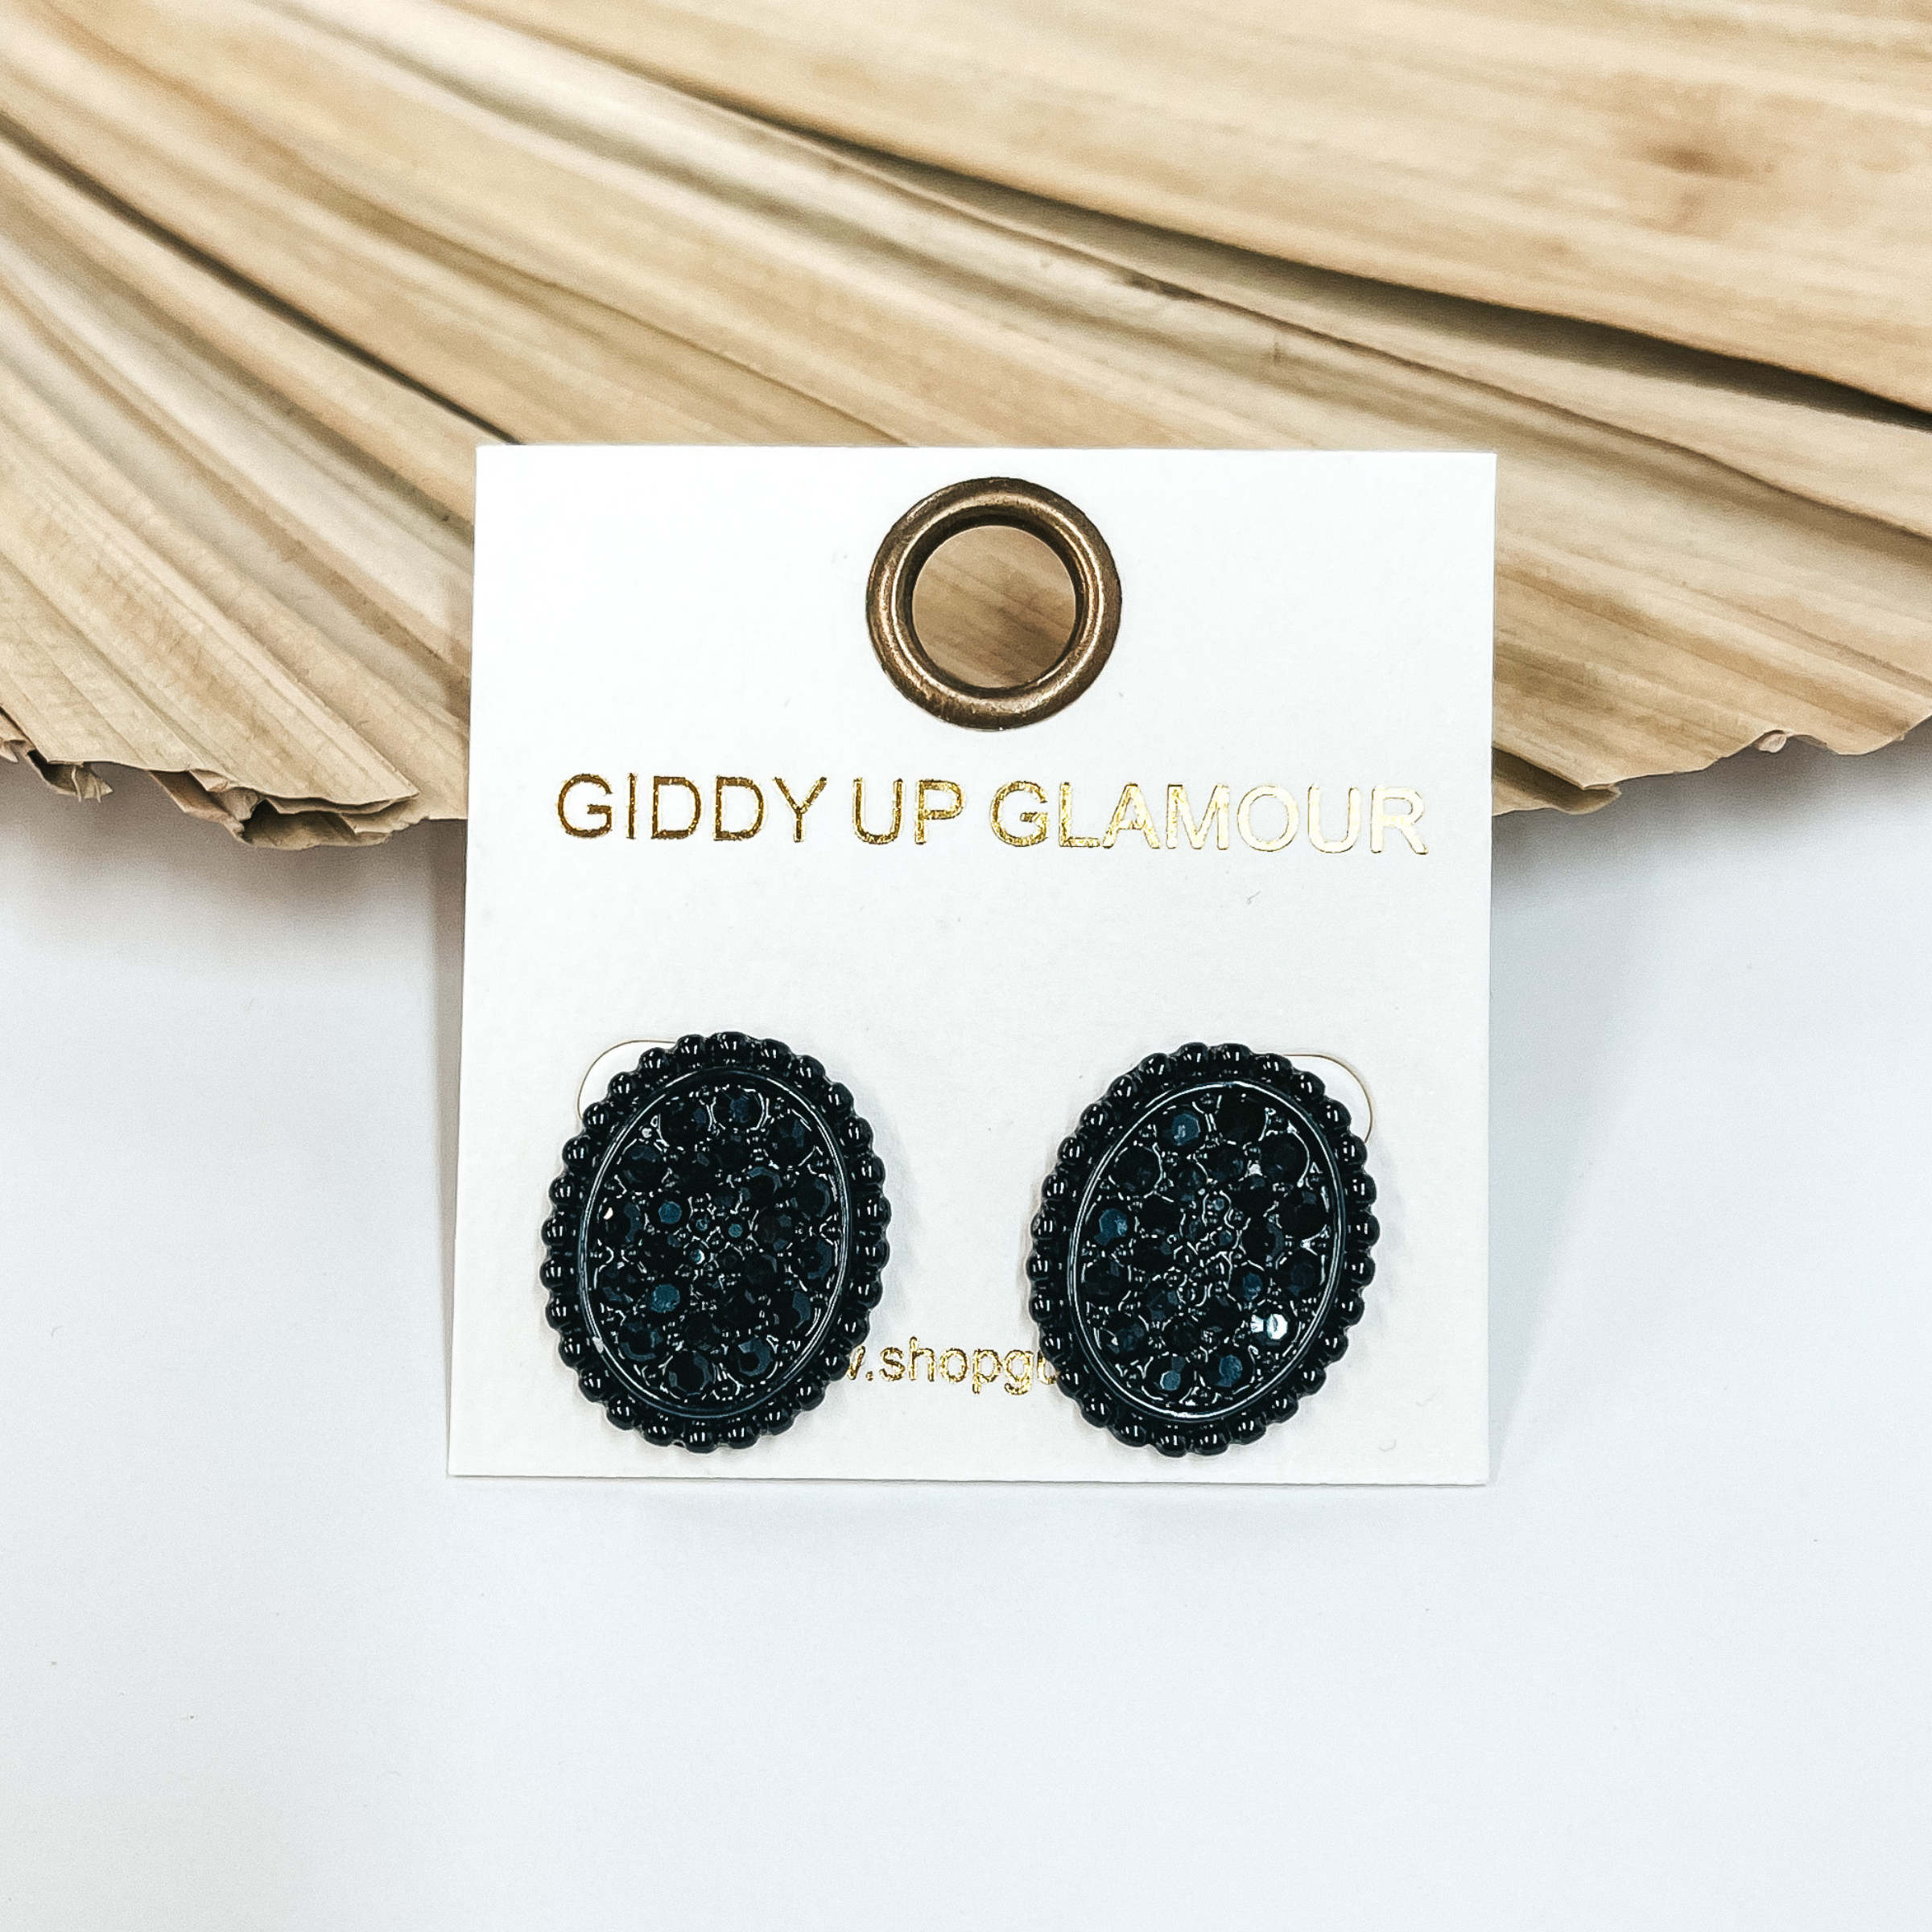 Black oval post earrings with black crystals all in  the middle. Taken on a white background and leaned up against a dried up palm leaf.